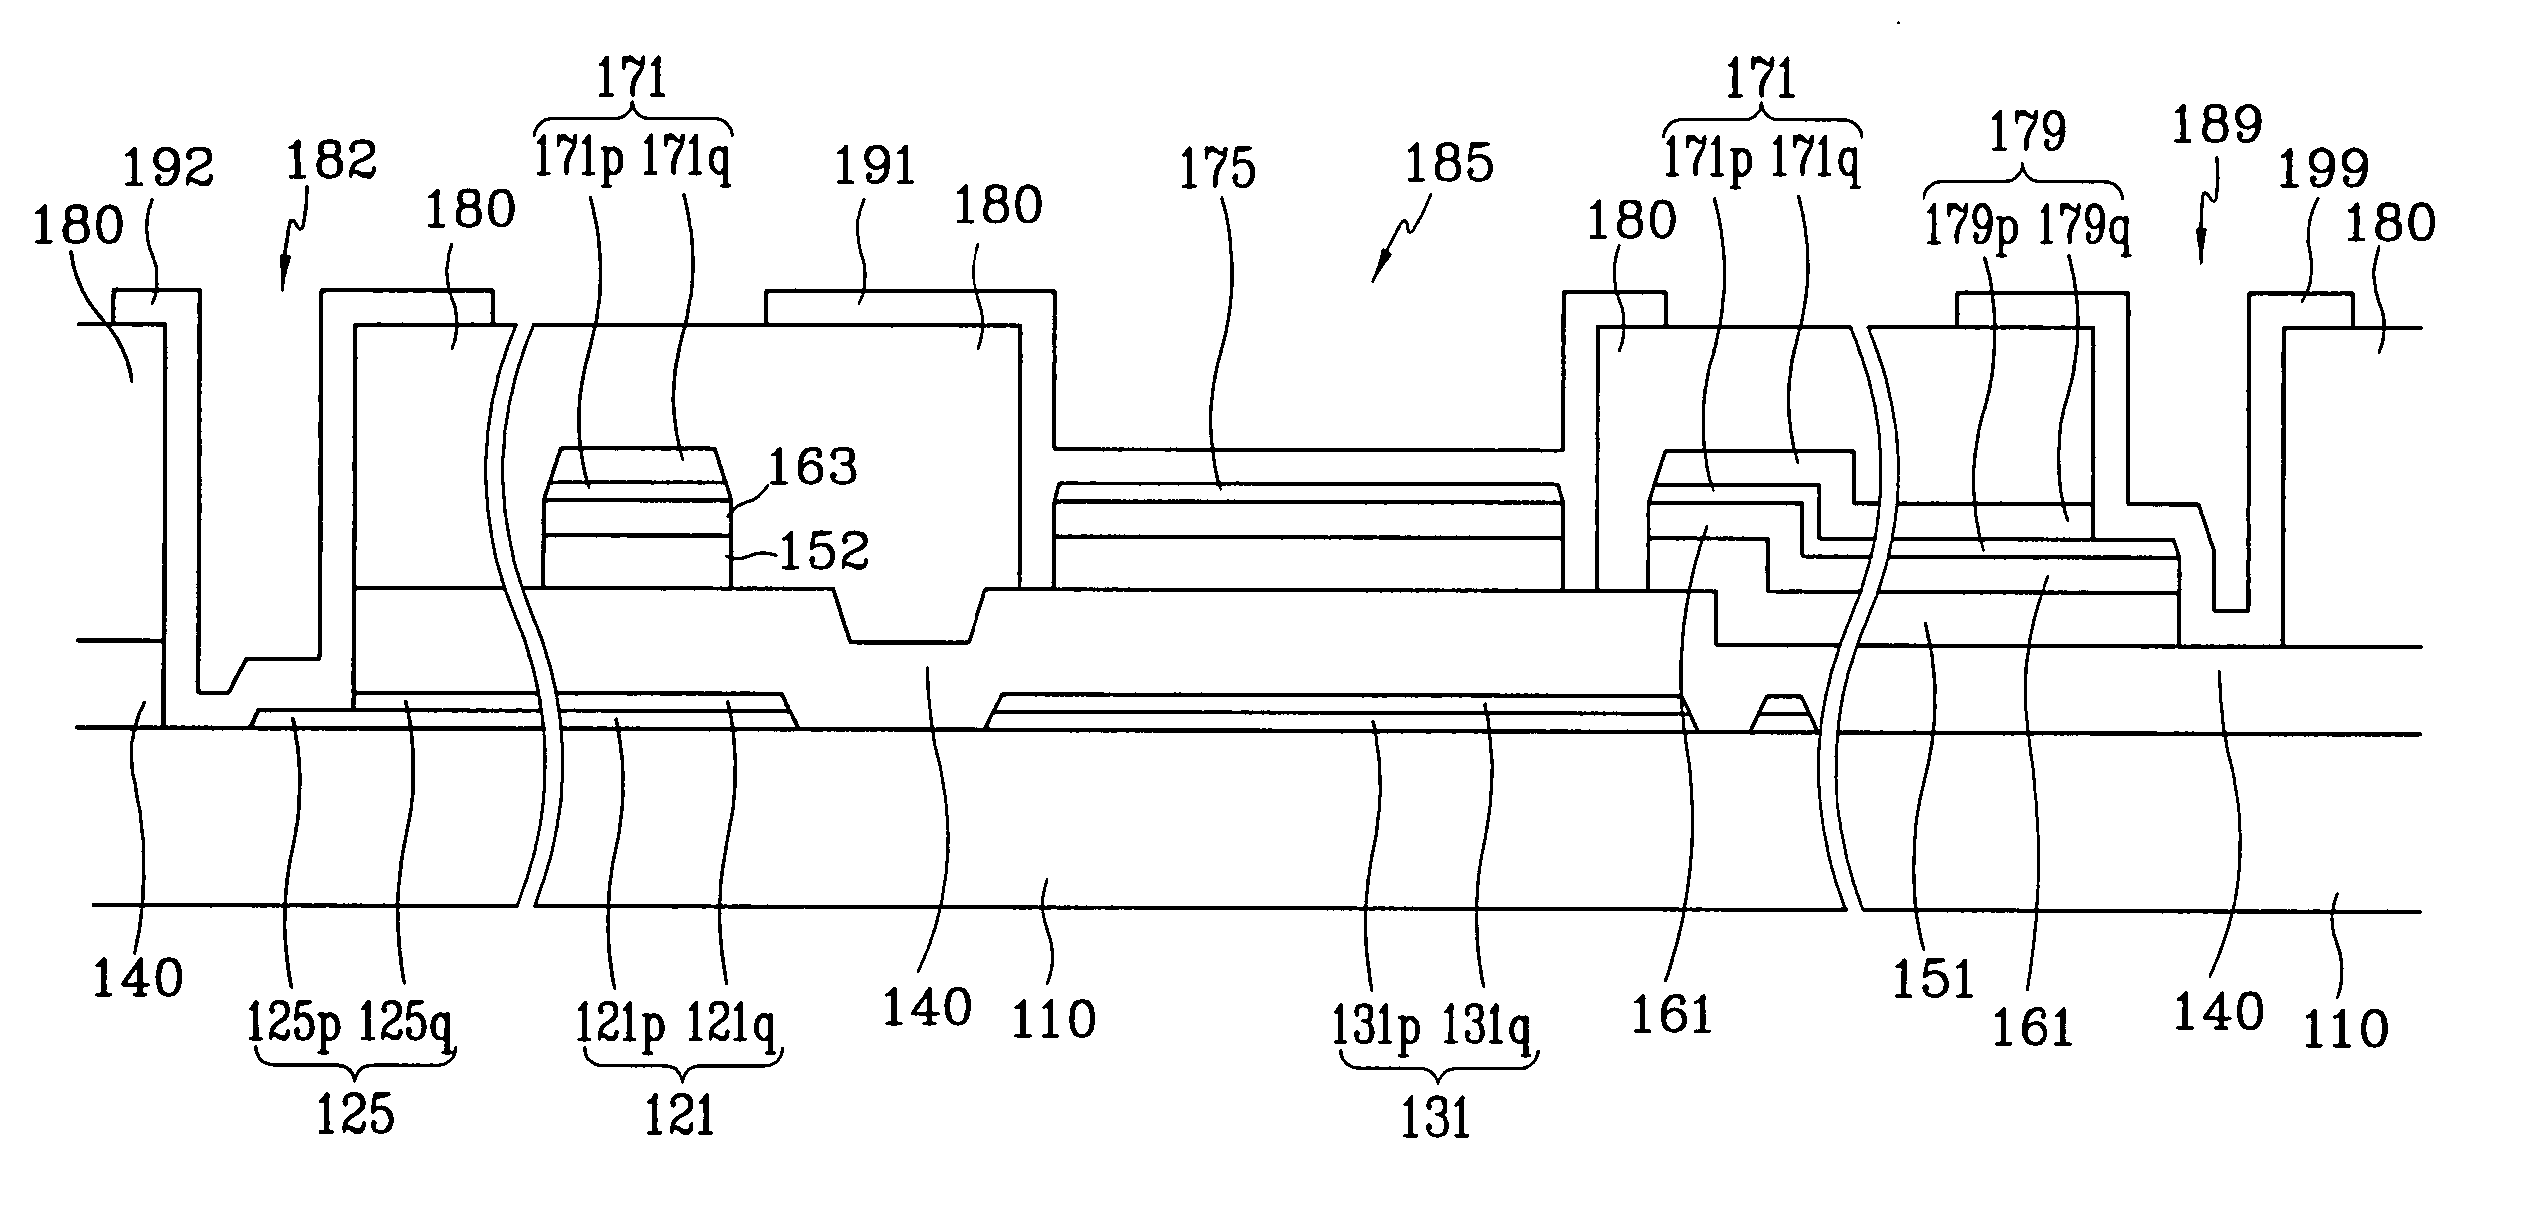 Thin film transistor array panel, manufacturing method thereof, and mask therefor